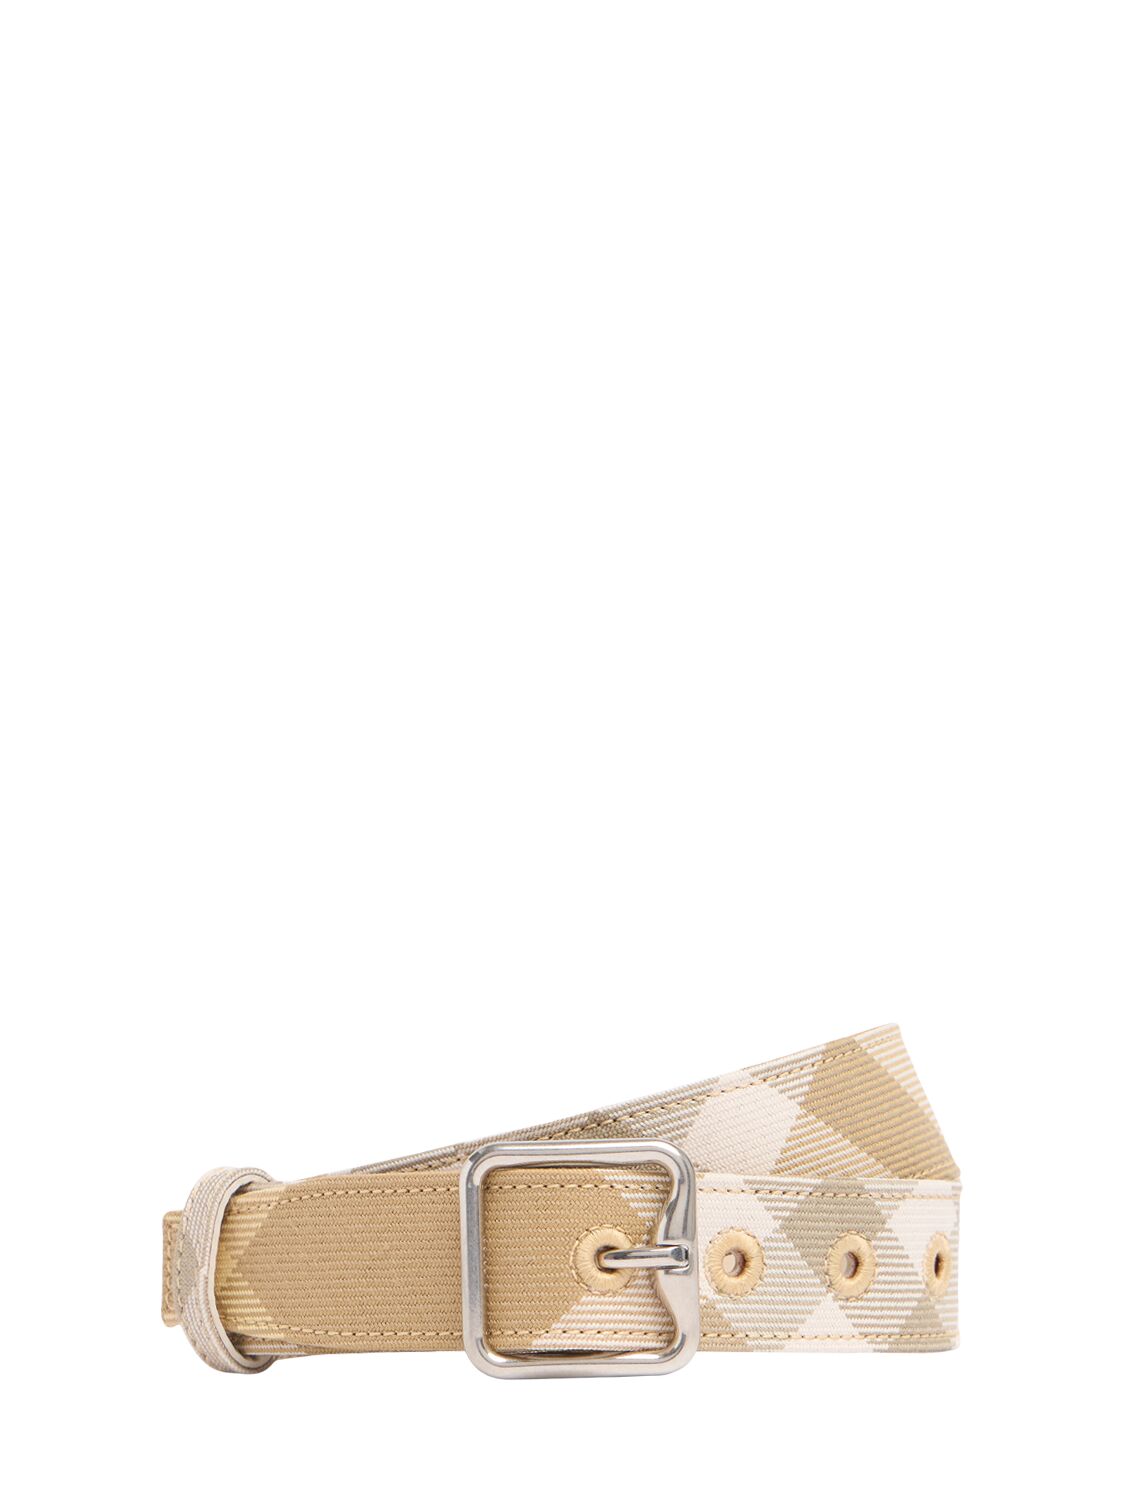 Burberry 30mm Lb B Buckle Check Belt In Neutral